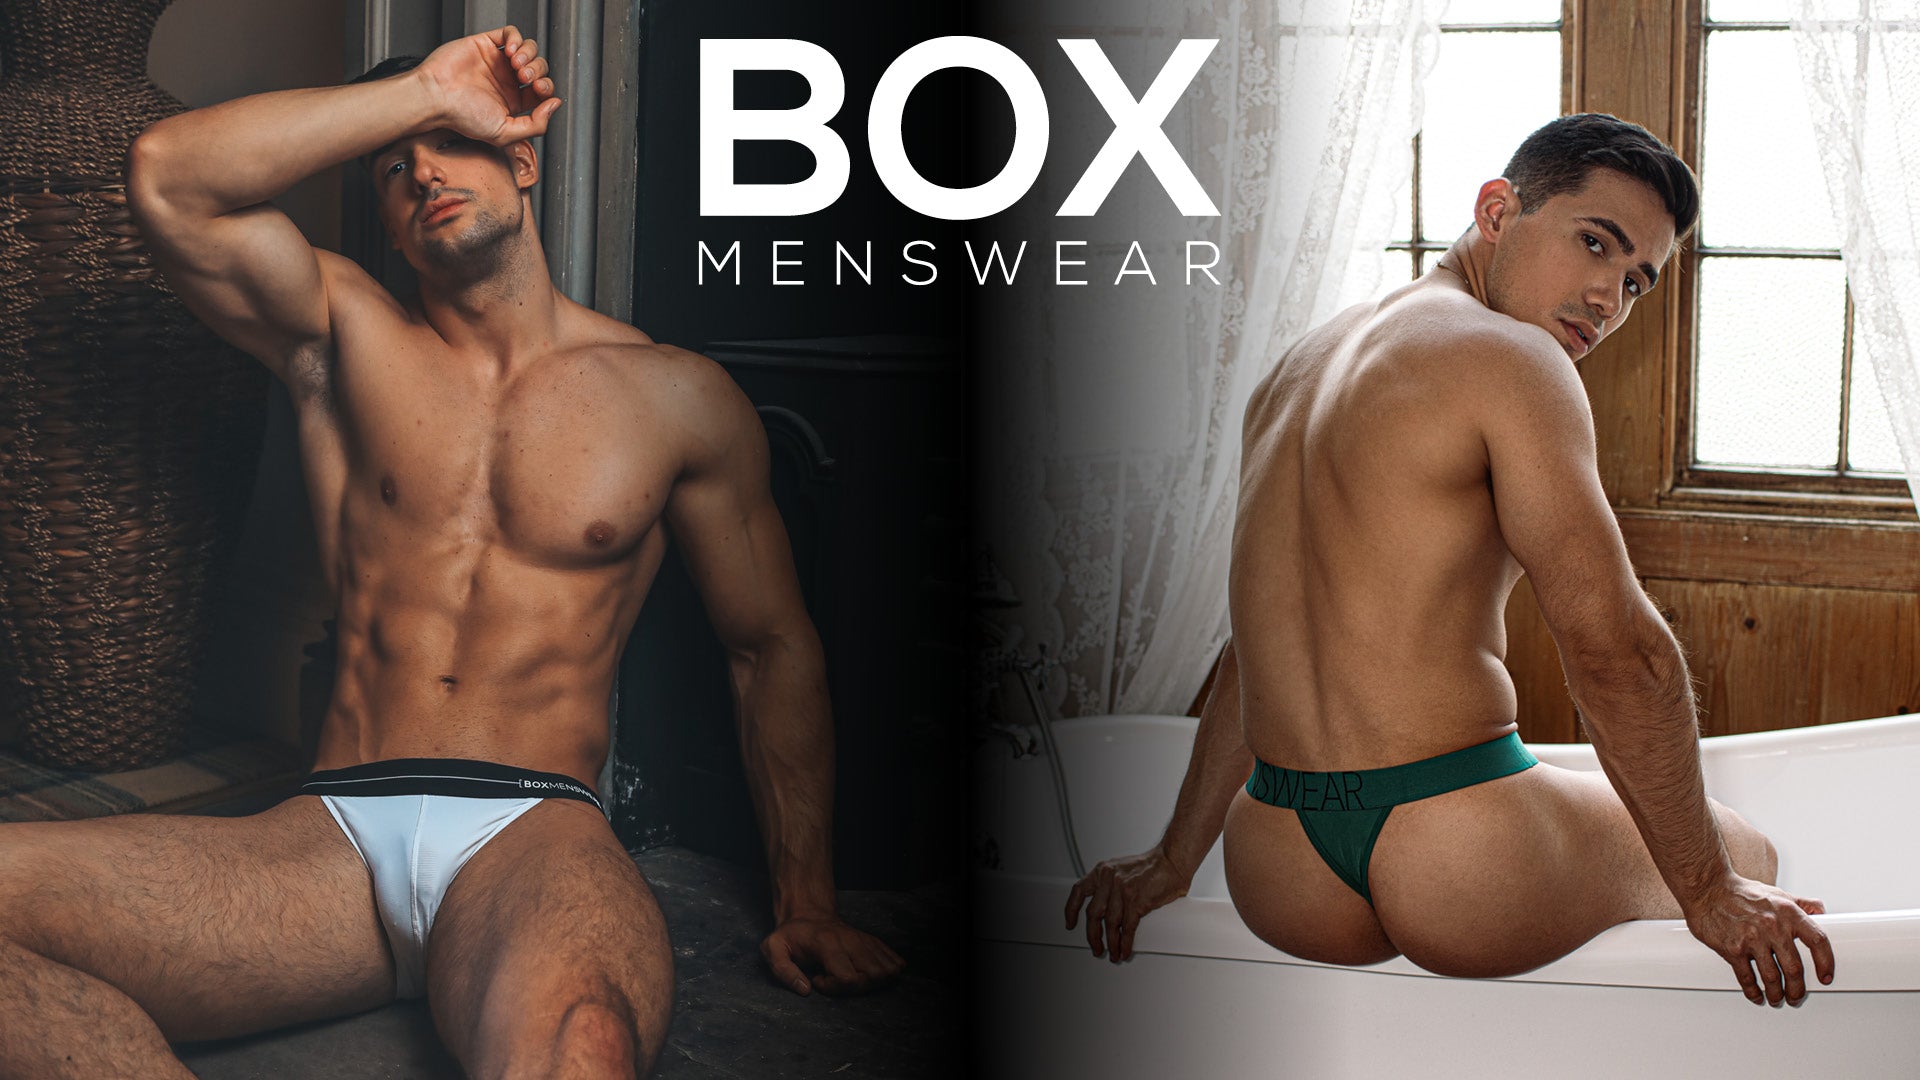 PURCHASE OF UNDERWEAR AT THE SHIRT BOX BENEFITS MEN'S HEALTH ALL